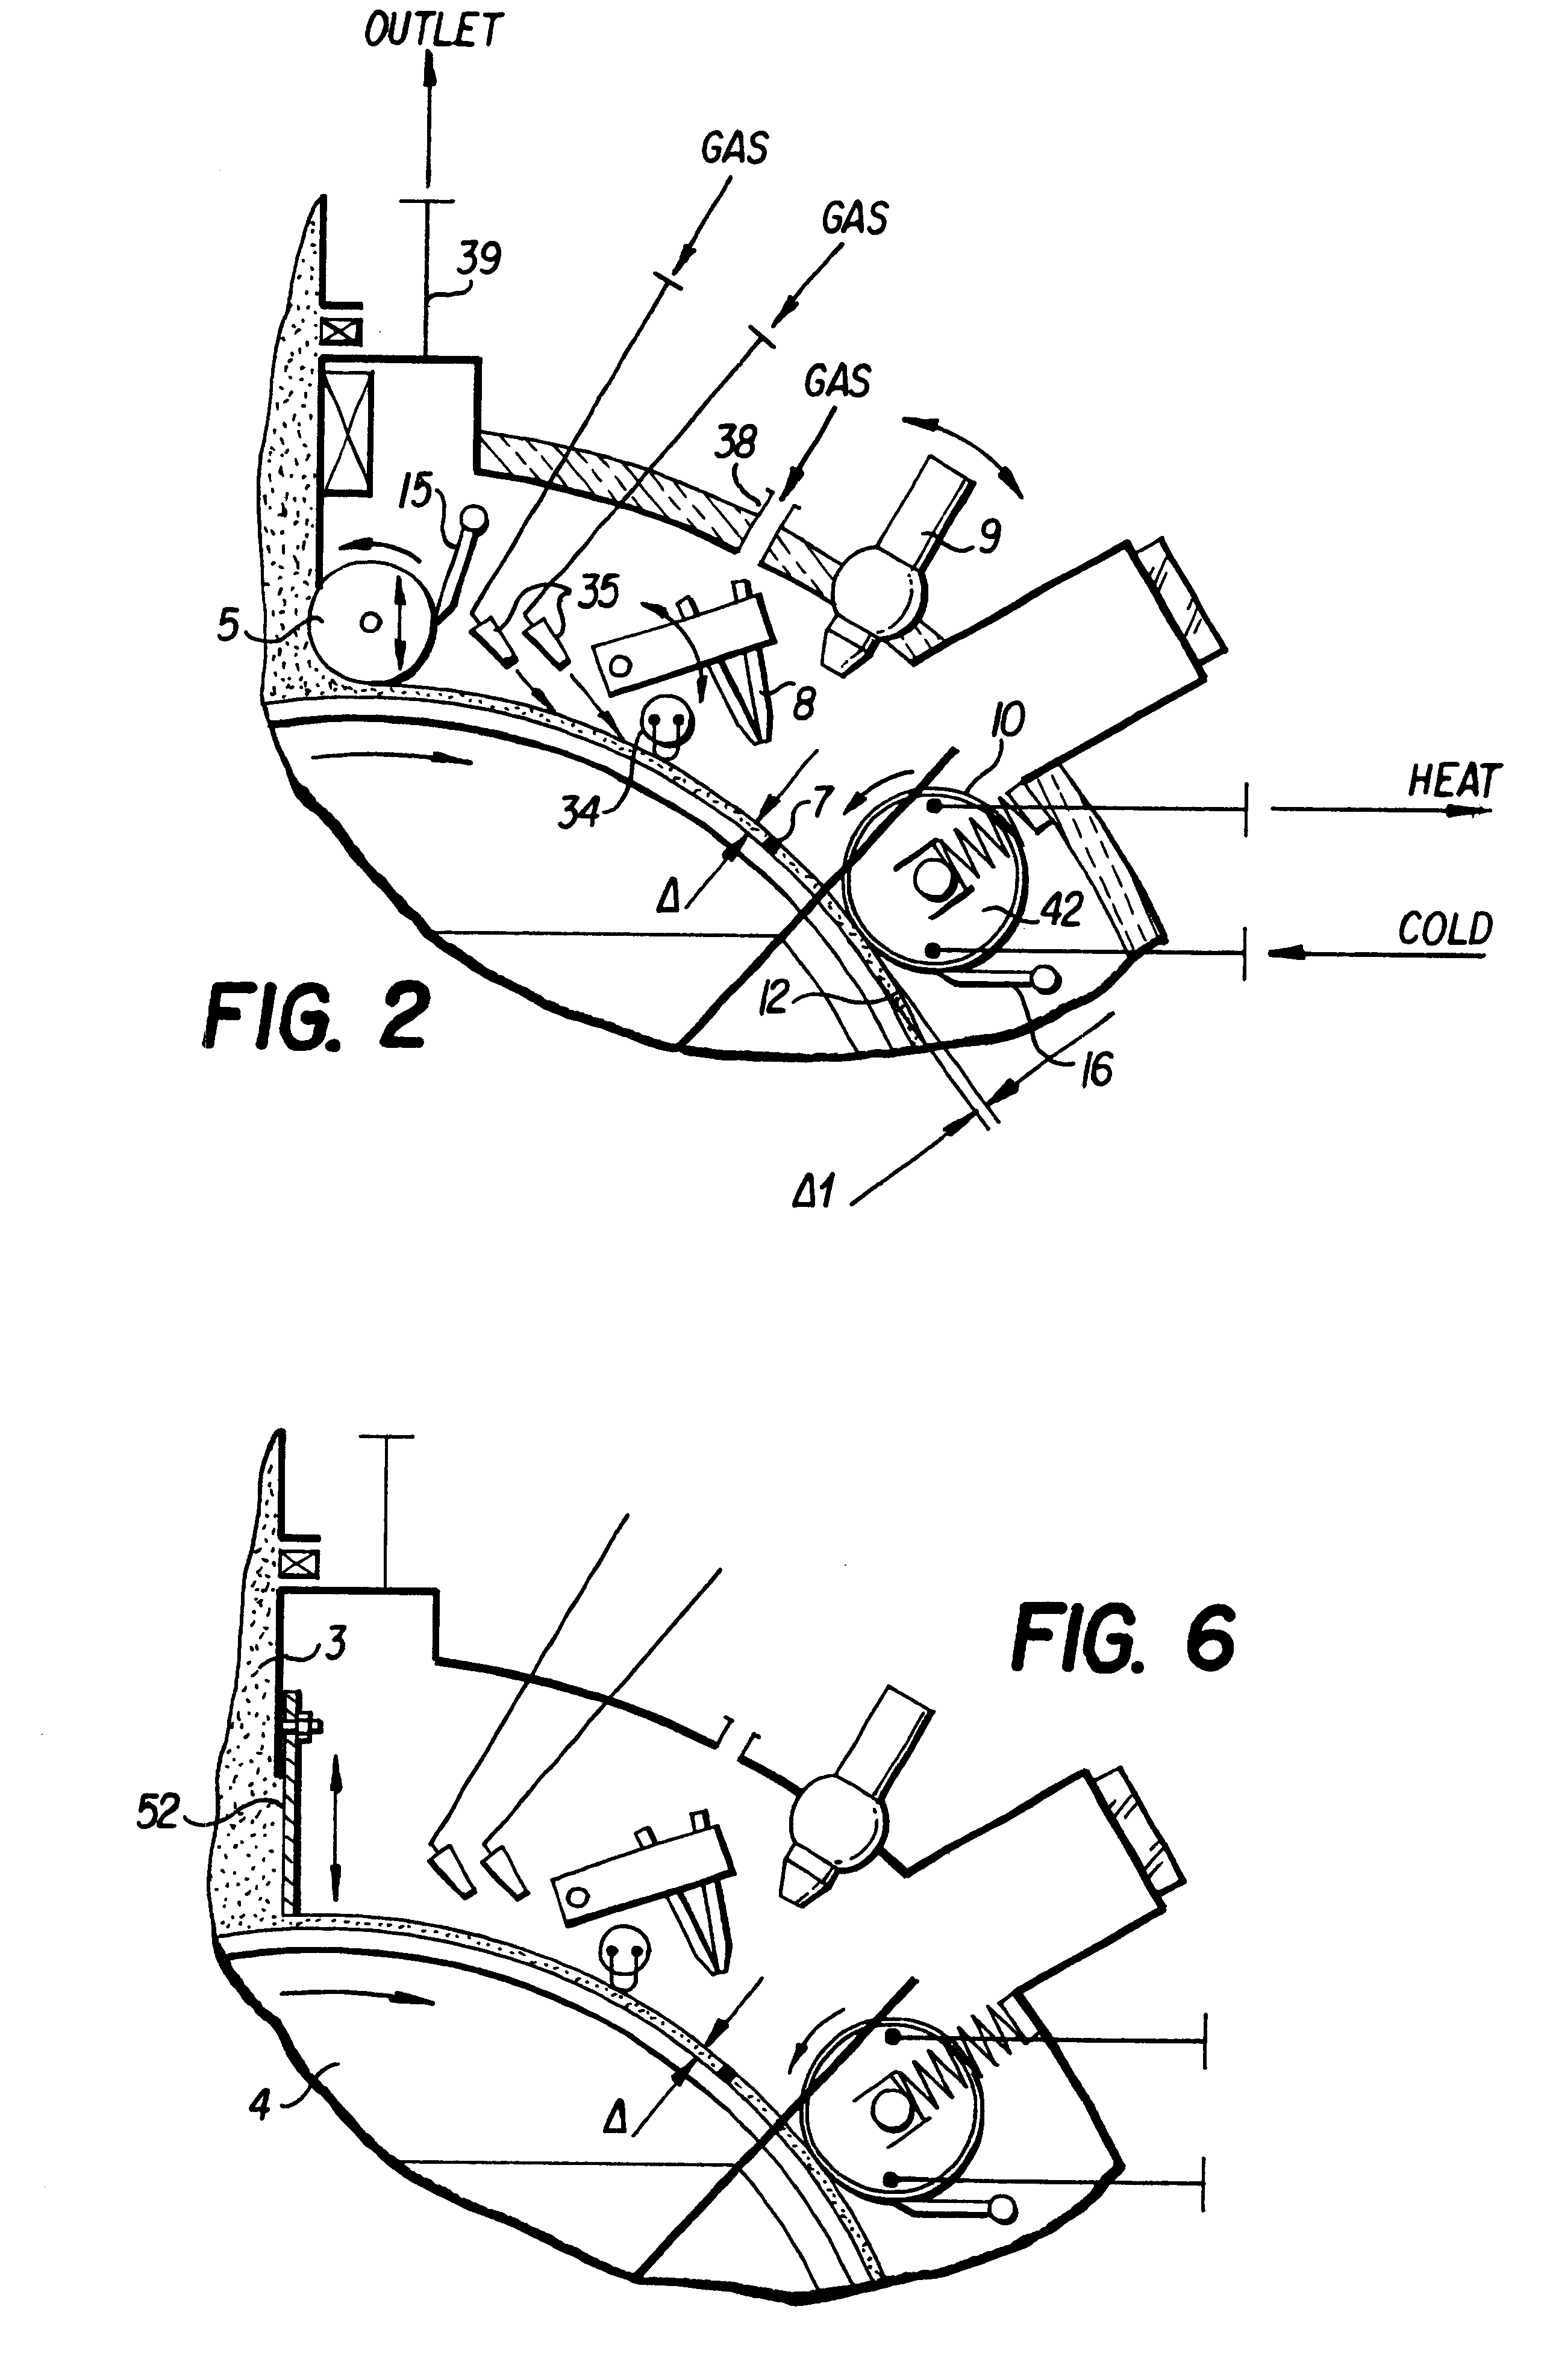 Apparatus for self-propagating high temperature synthesis